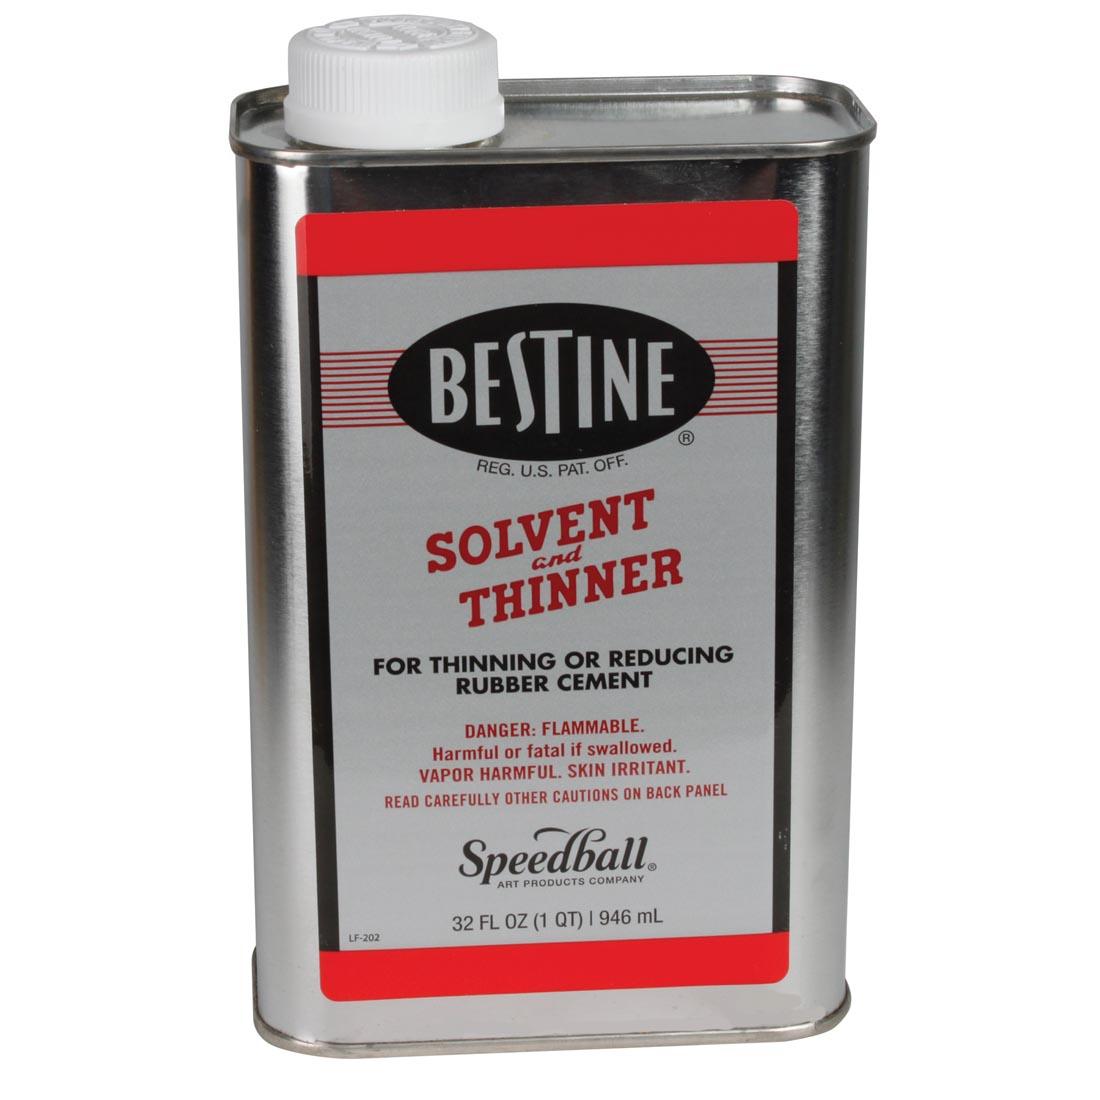 Bestine Rubber Cement Solvent and Thinner